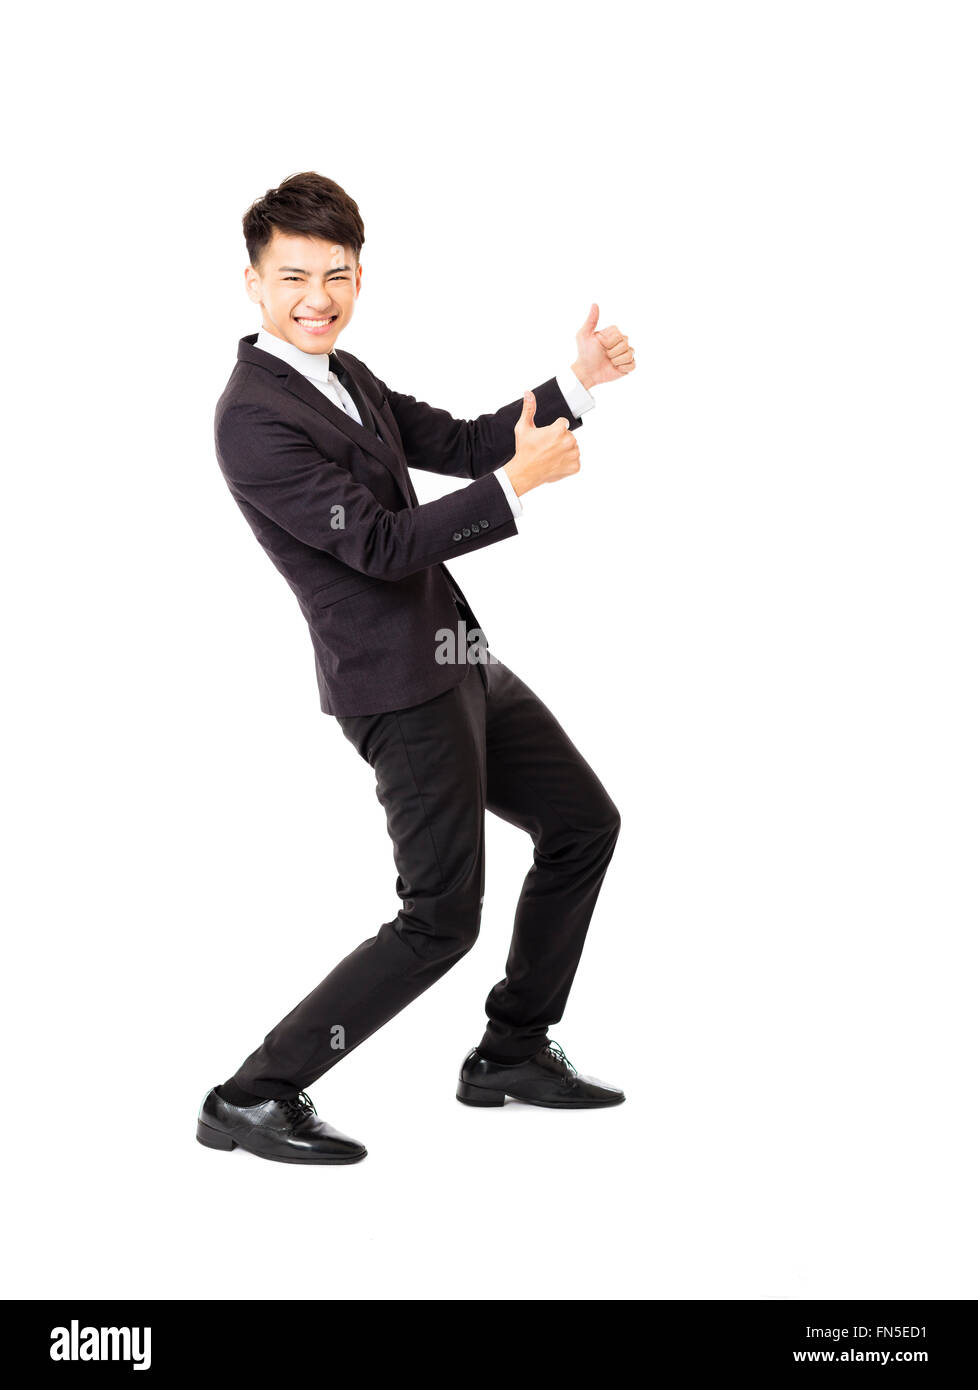 happy  young business man with successful gesture Stock Photo